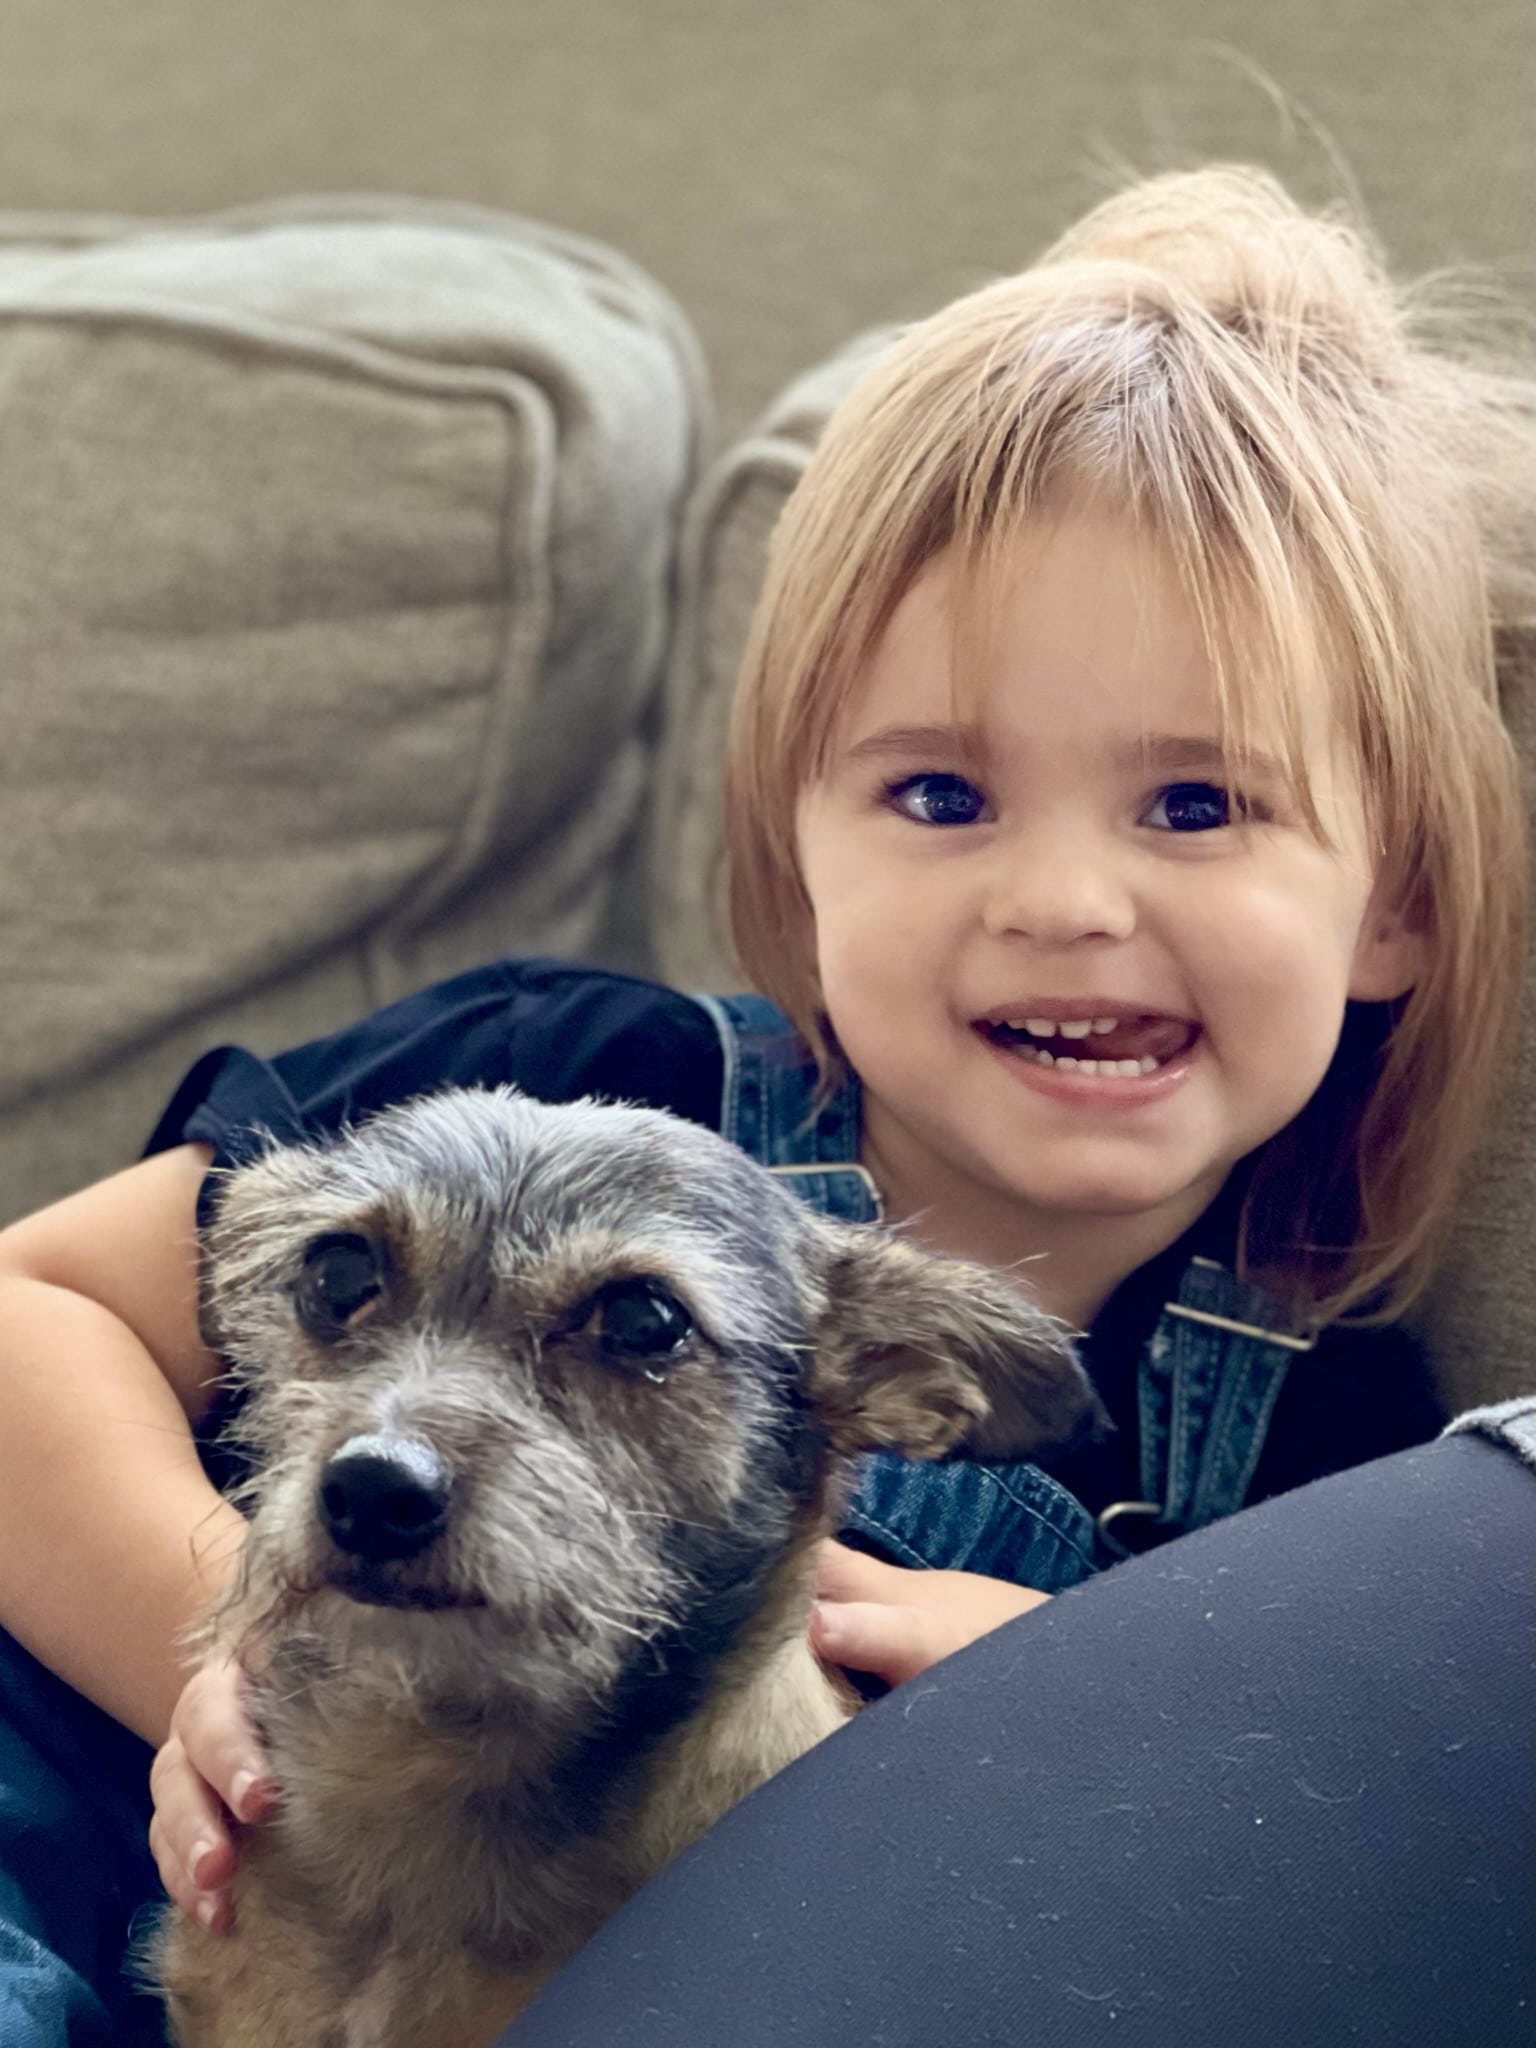 How To Choose The Right Pet For Your Kids